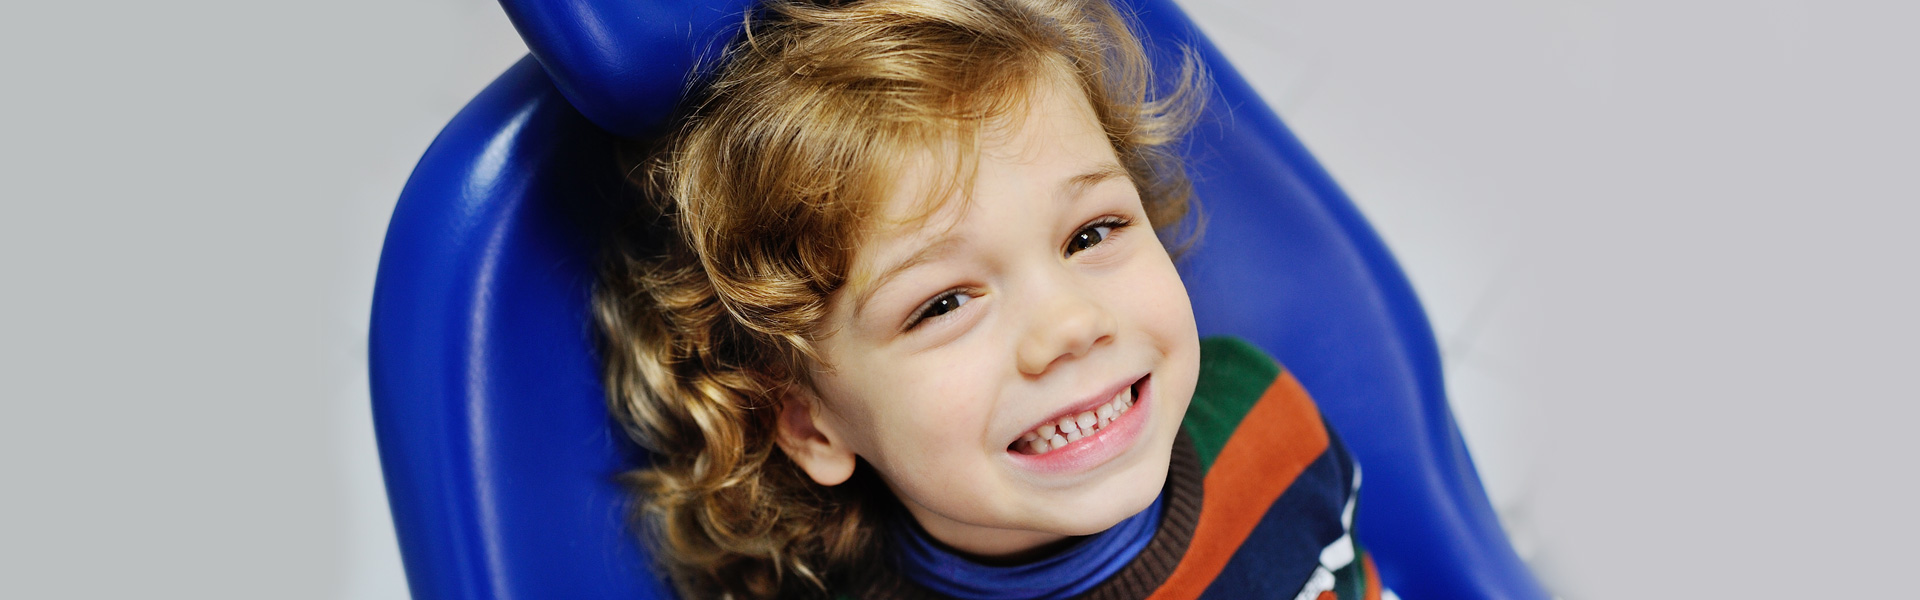 Services Offered in Children Dentistry 